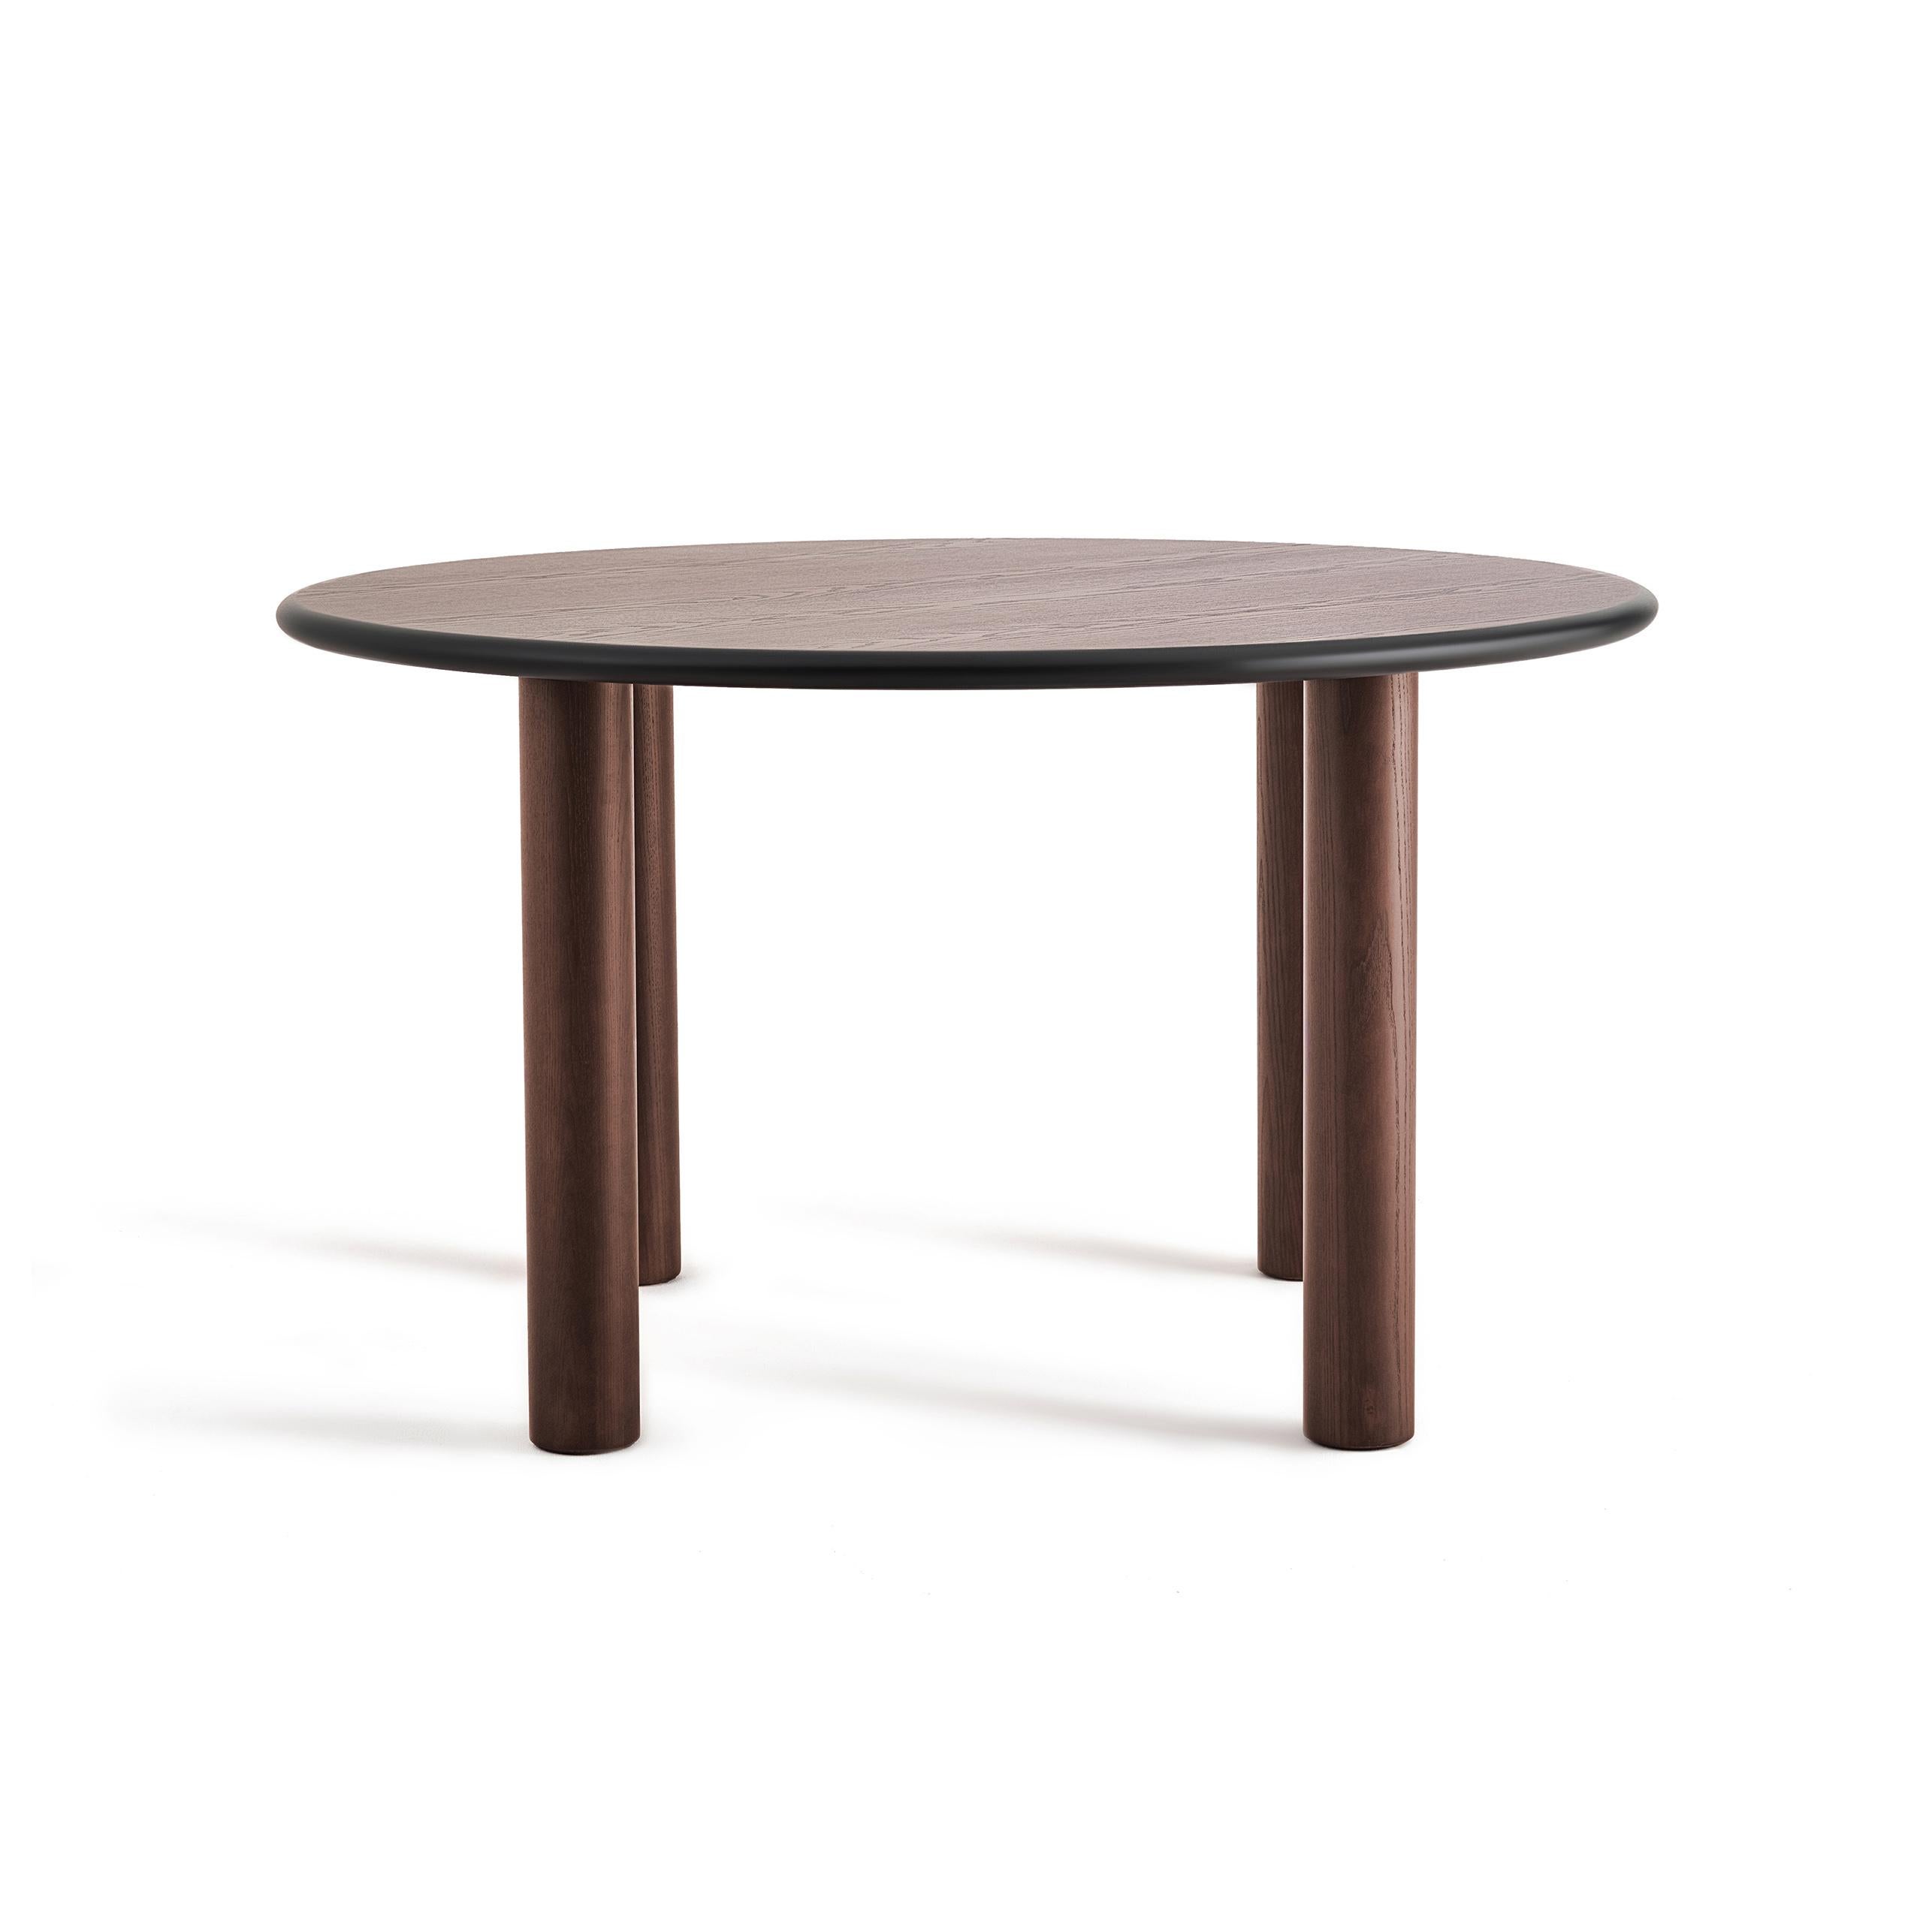 Ukrainian Contemporary Dining Round Table 'Paul' by Noom, Brown Stained, 130 cm For Sale